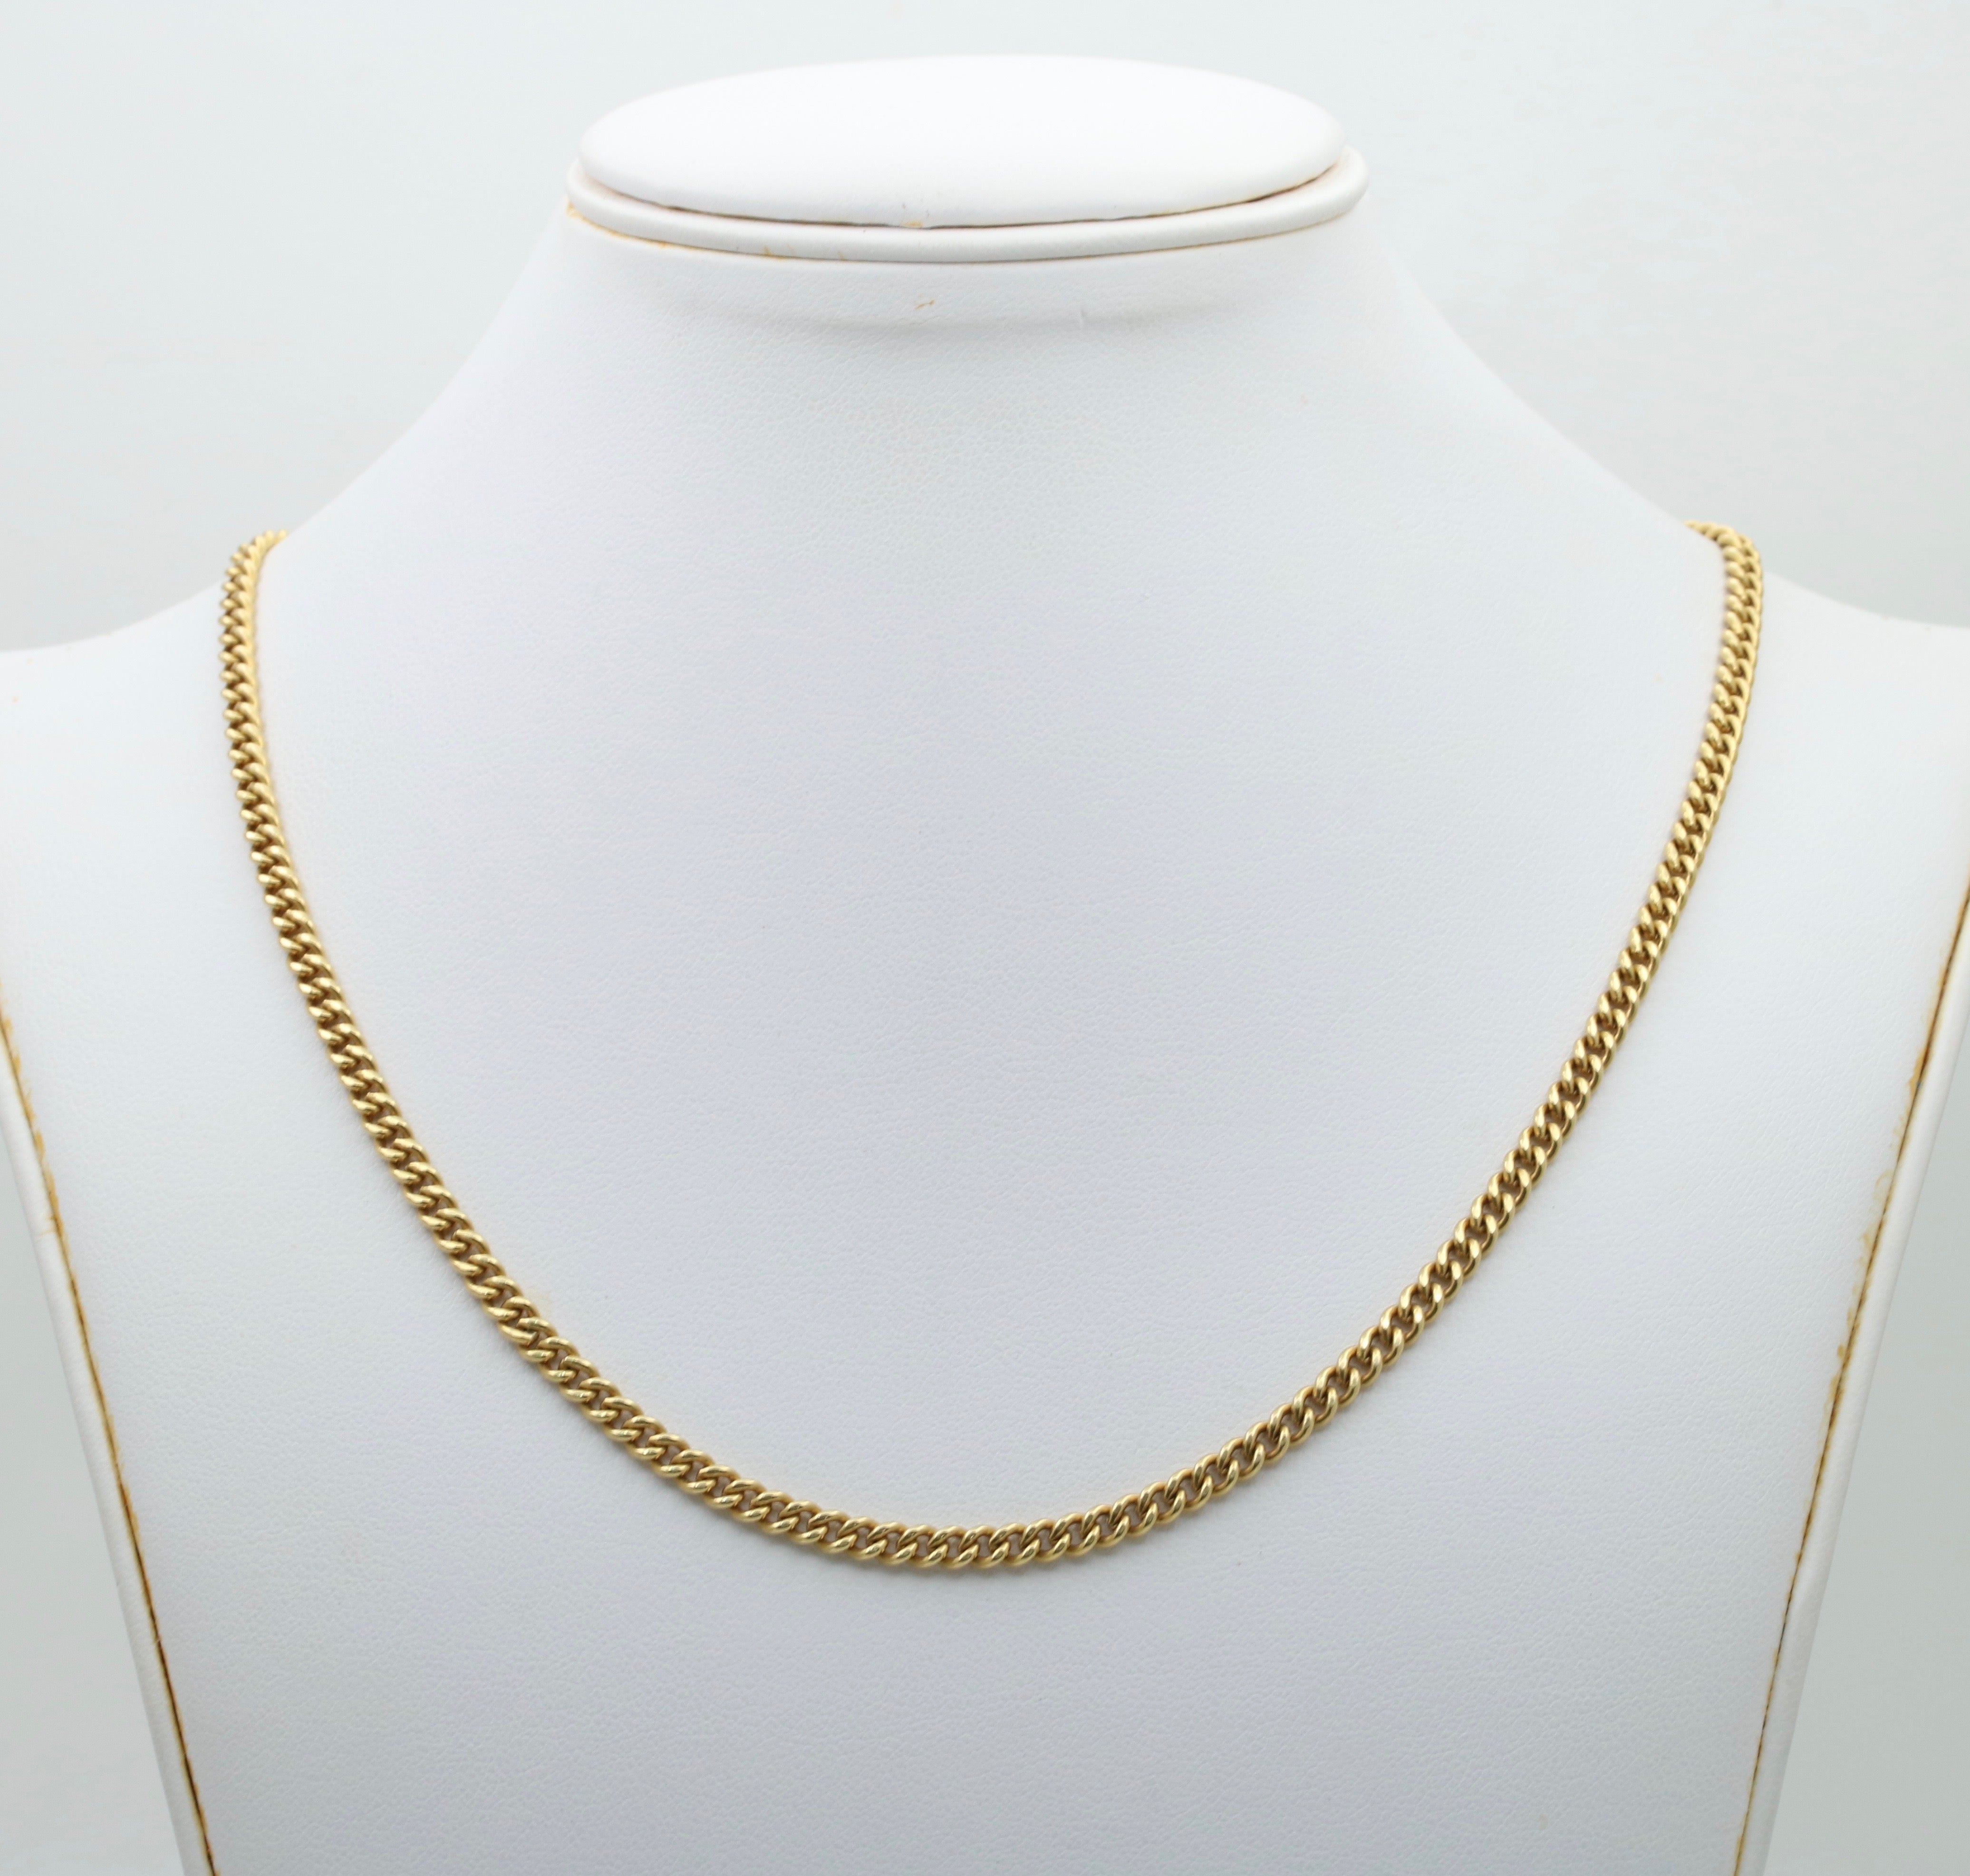 Tiffany HardWear Graduated Link Necklace in Yellow Gold with Freshwater  Pearls | Tiffany & Co.